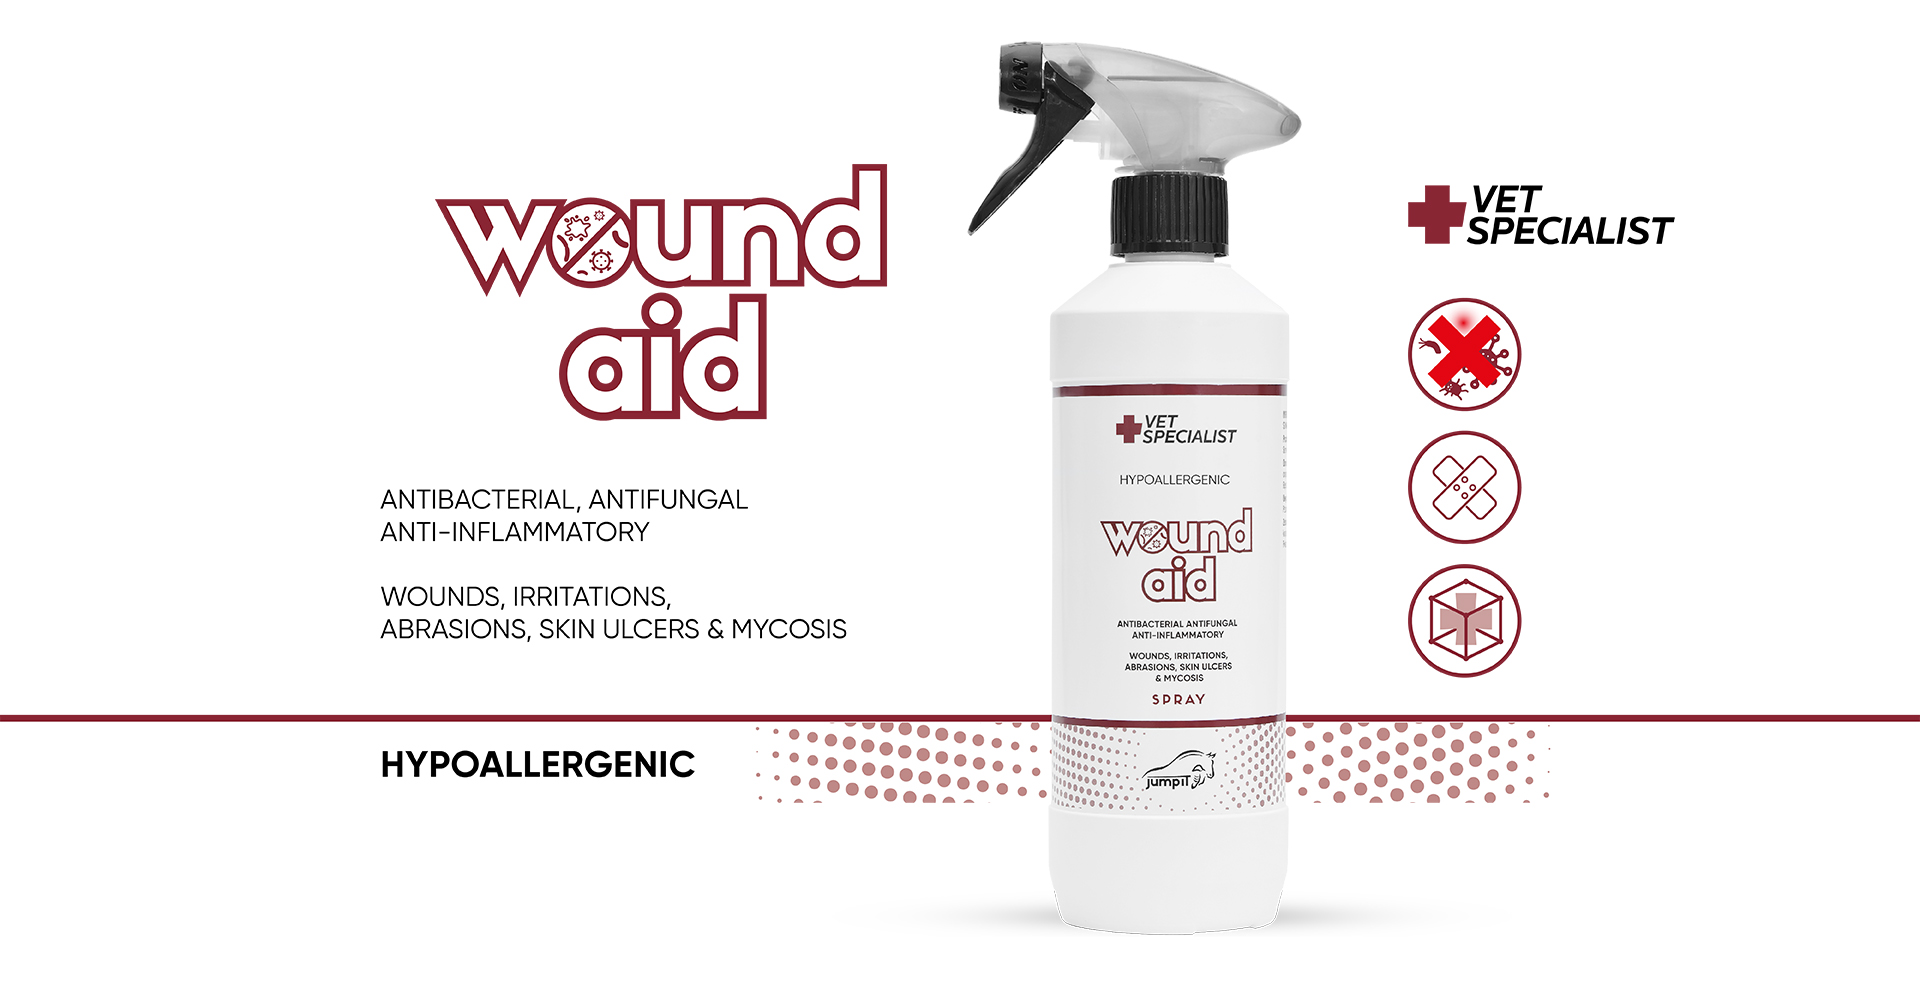 wound aid